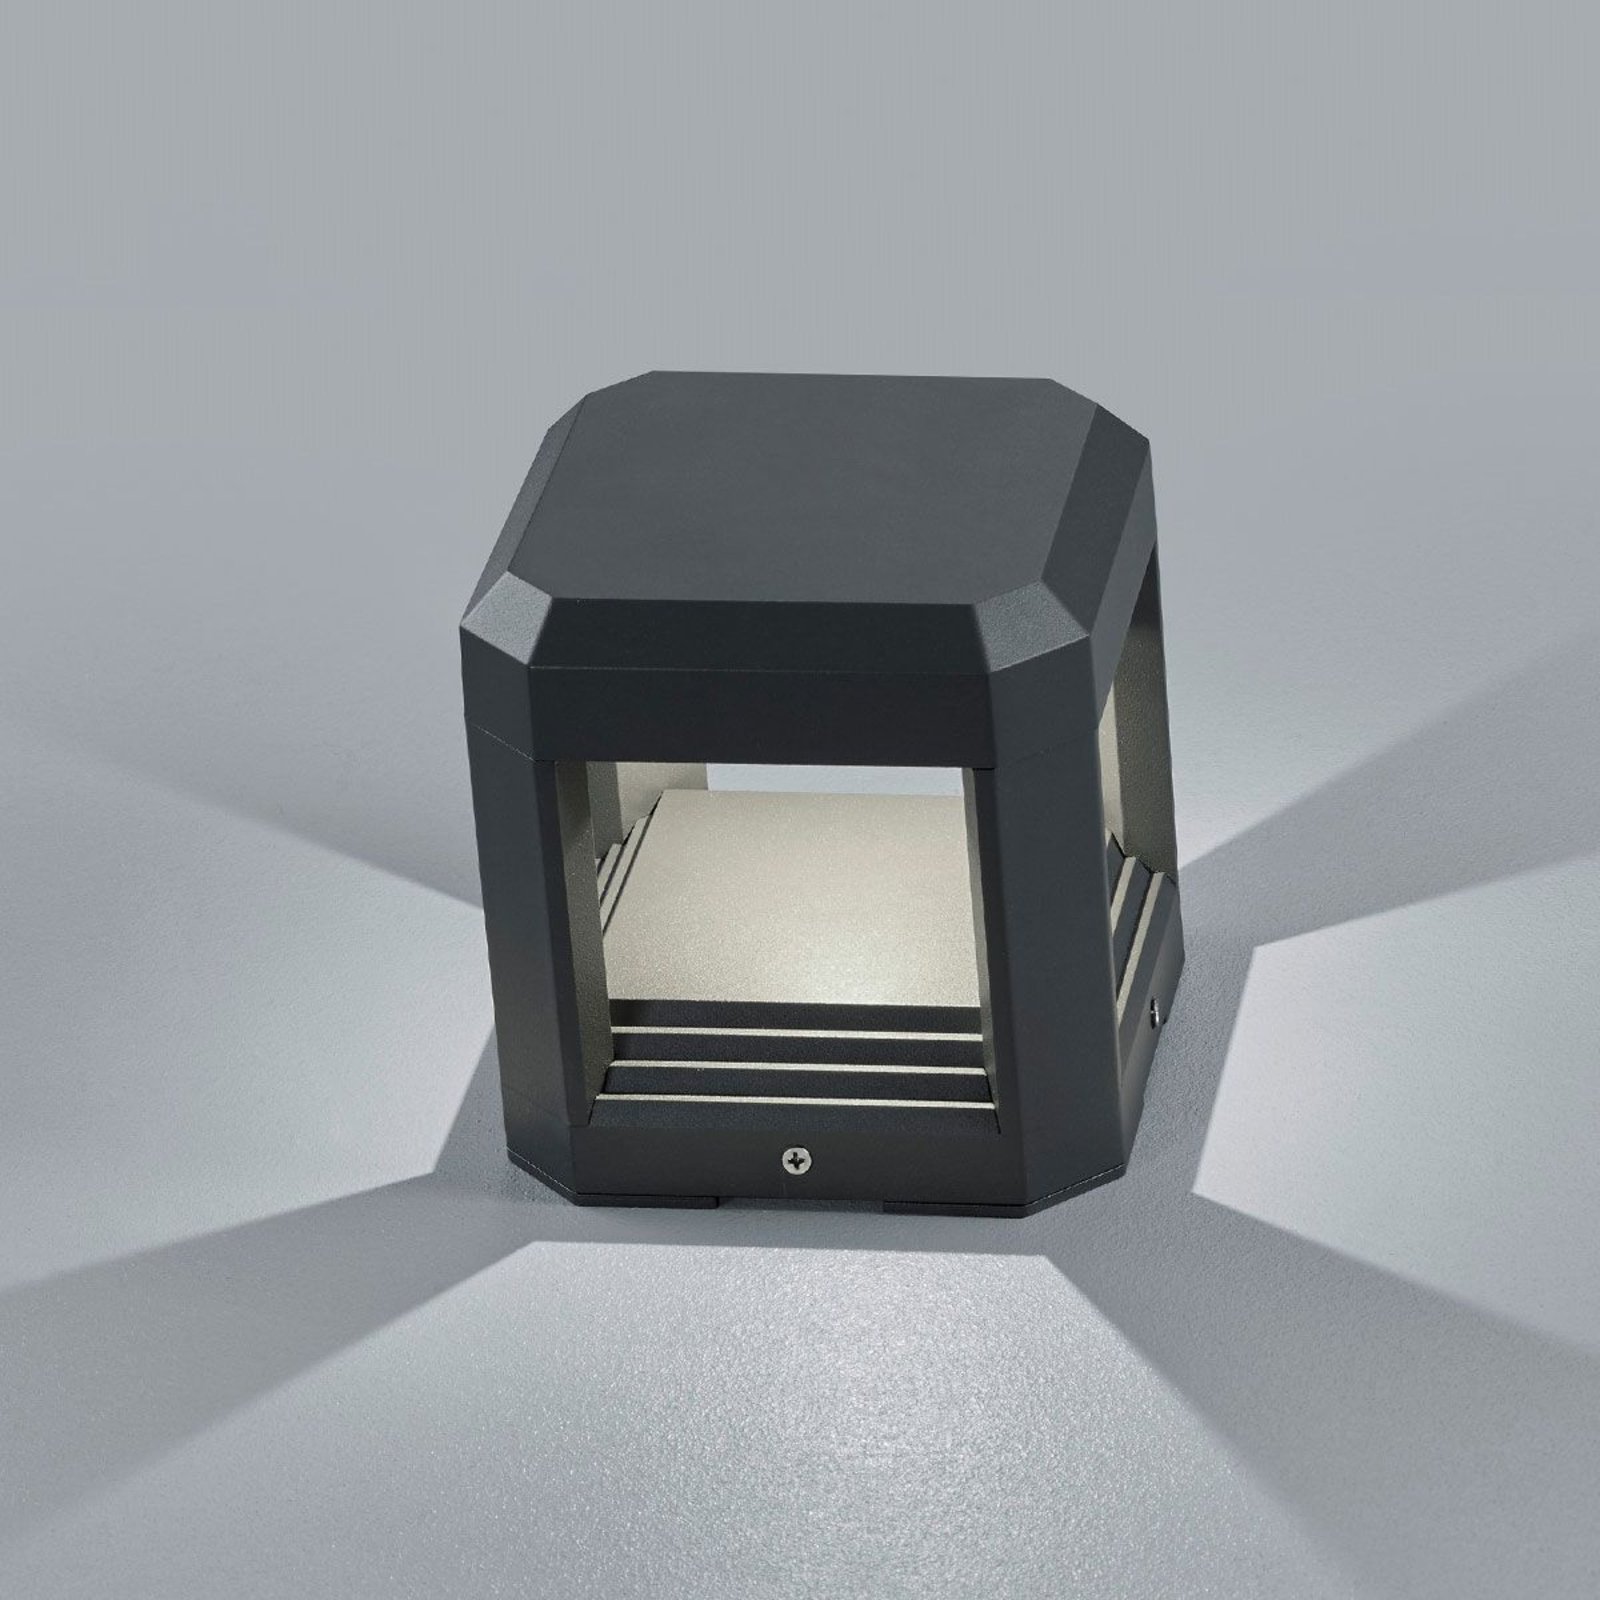 Logone LED outdoor wall light, cube-shaped